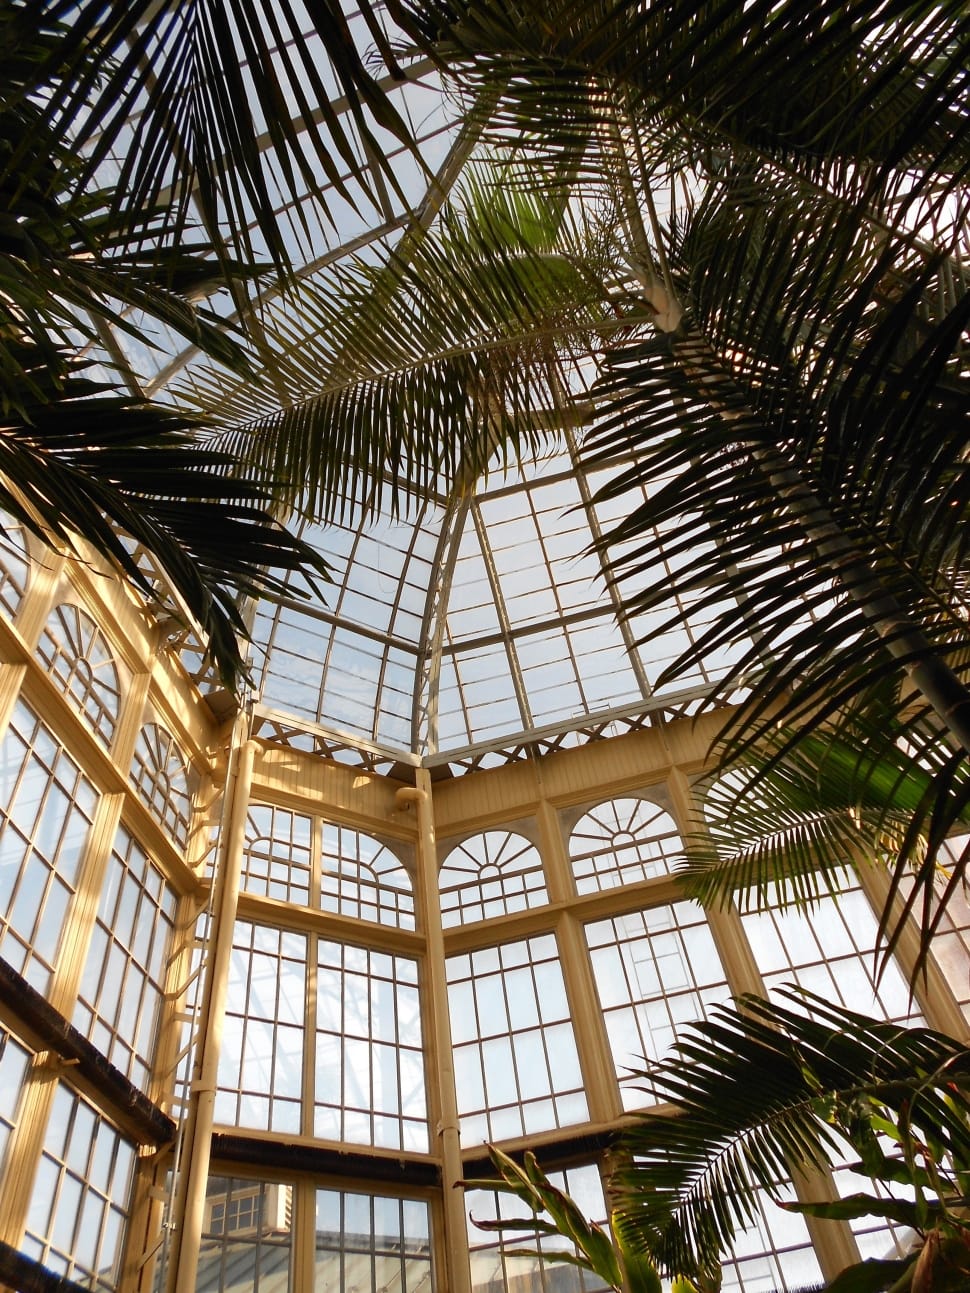 Baltimore, Maryland, Conservatory, Palm Tree, Low Angle - Baltimore Druid Hill Park - HD Wallpaper 